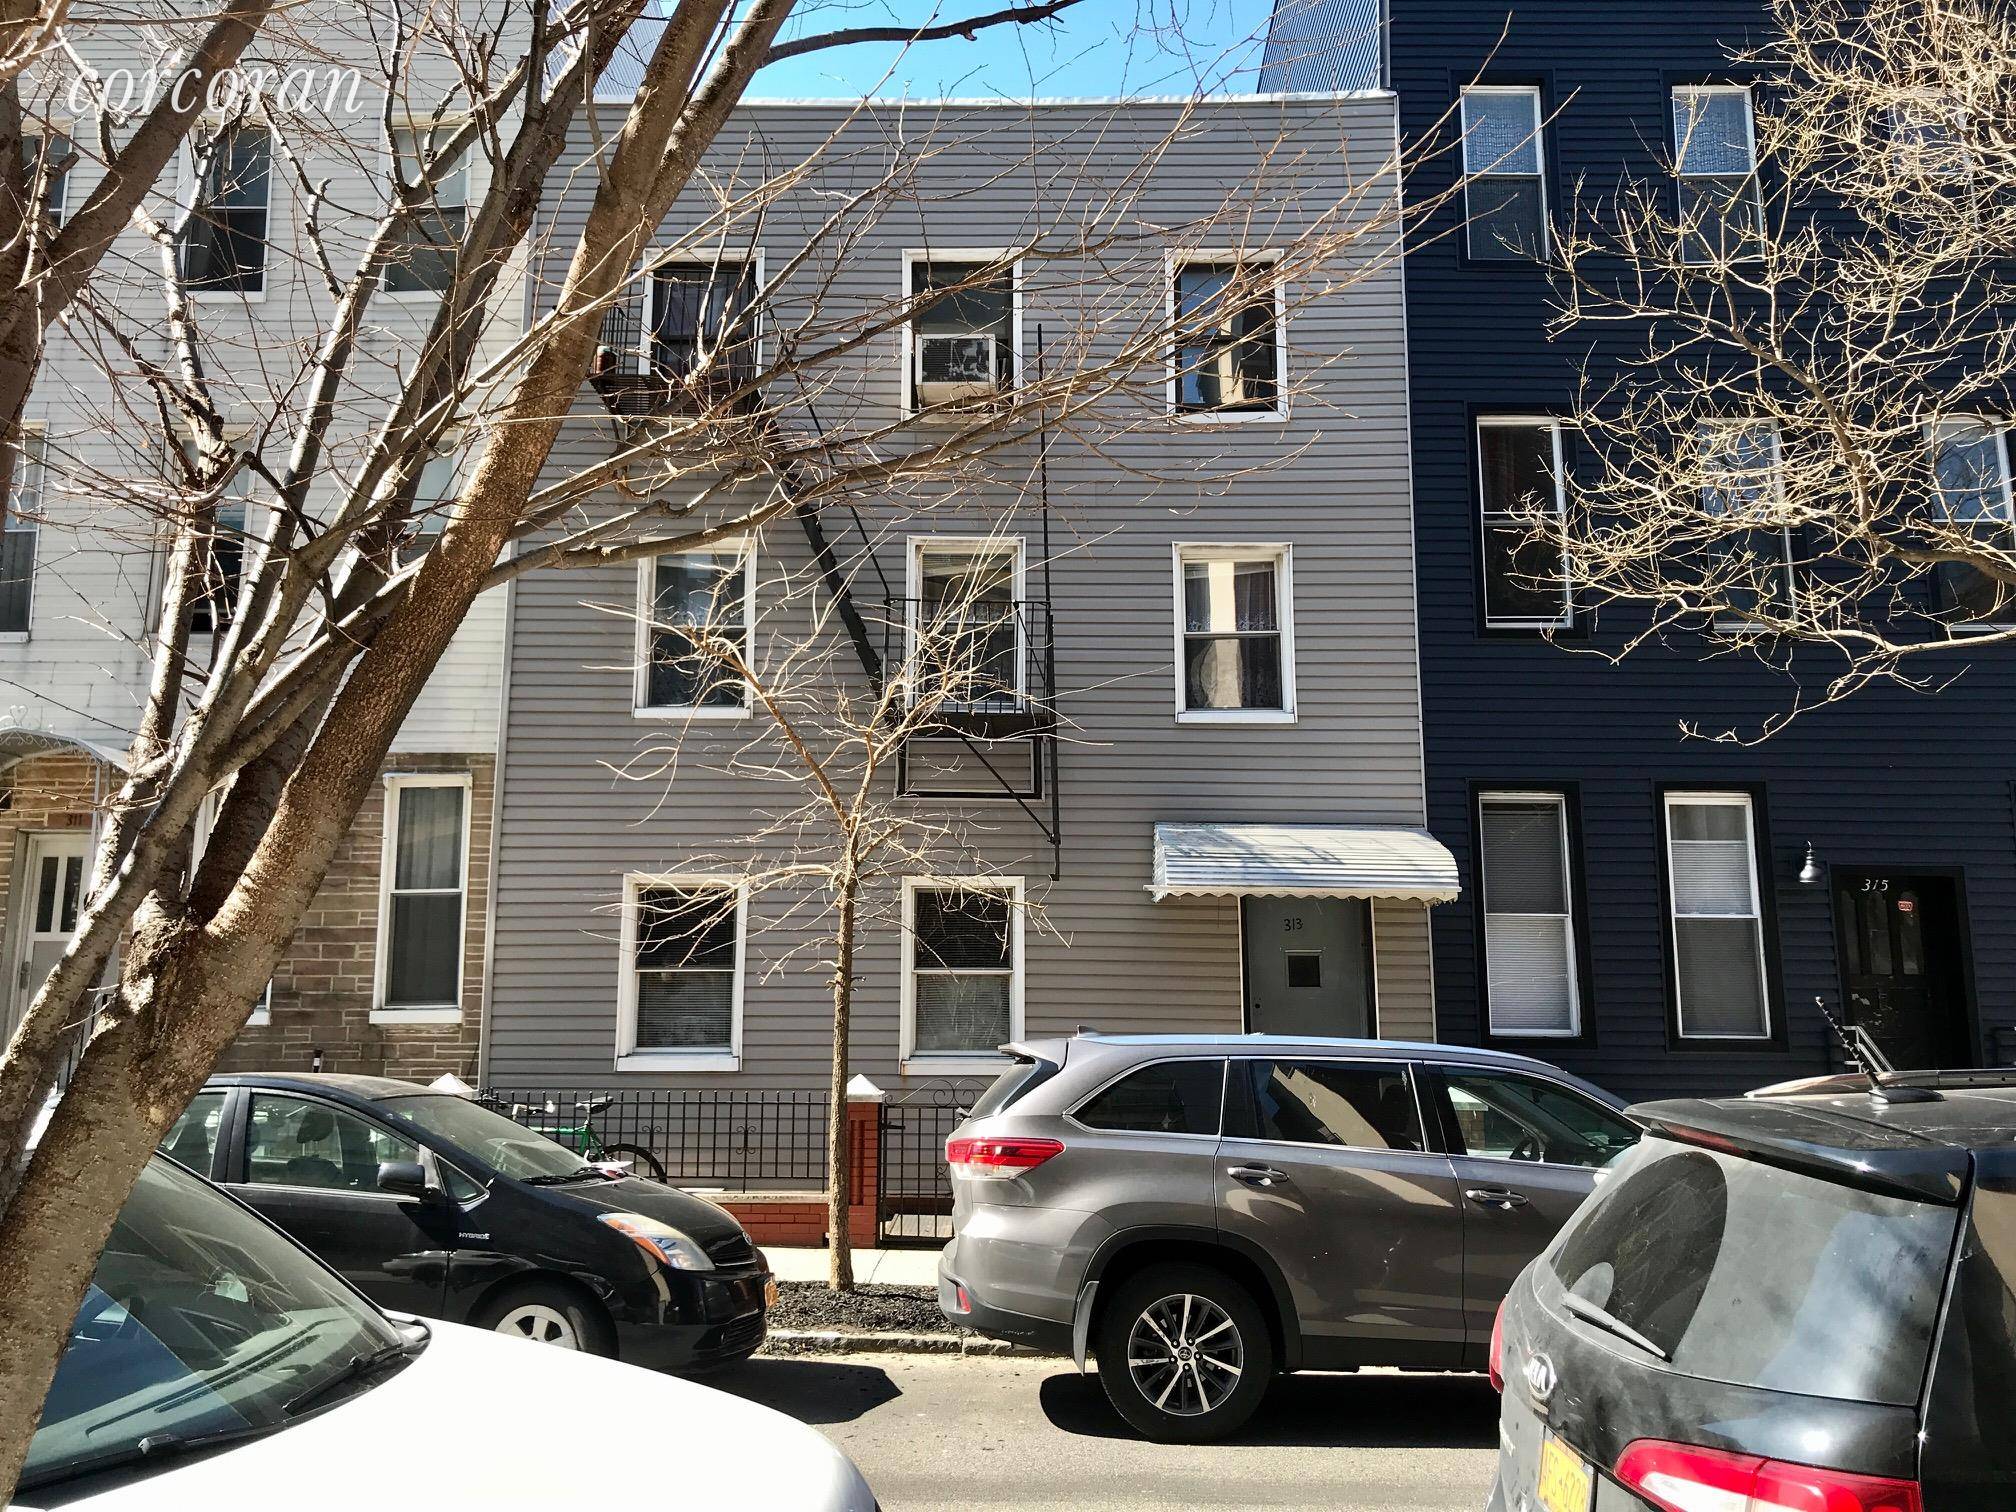 Six Unit Townhouse on a beautiful tree lined residential street in Prime Greenpoint Brooklyn.